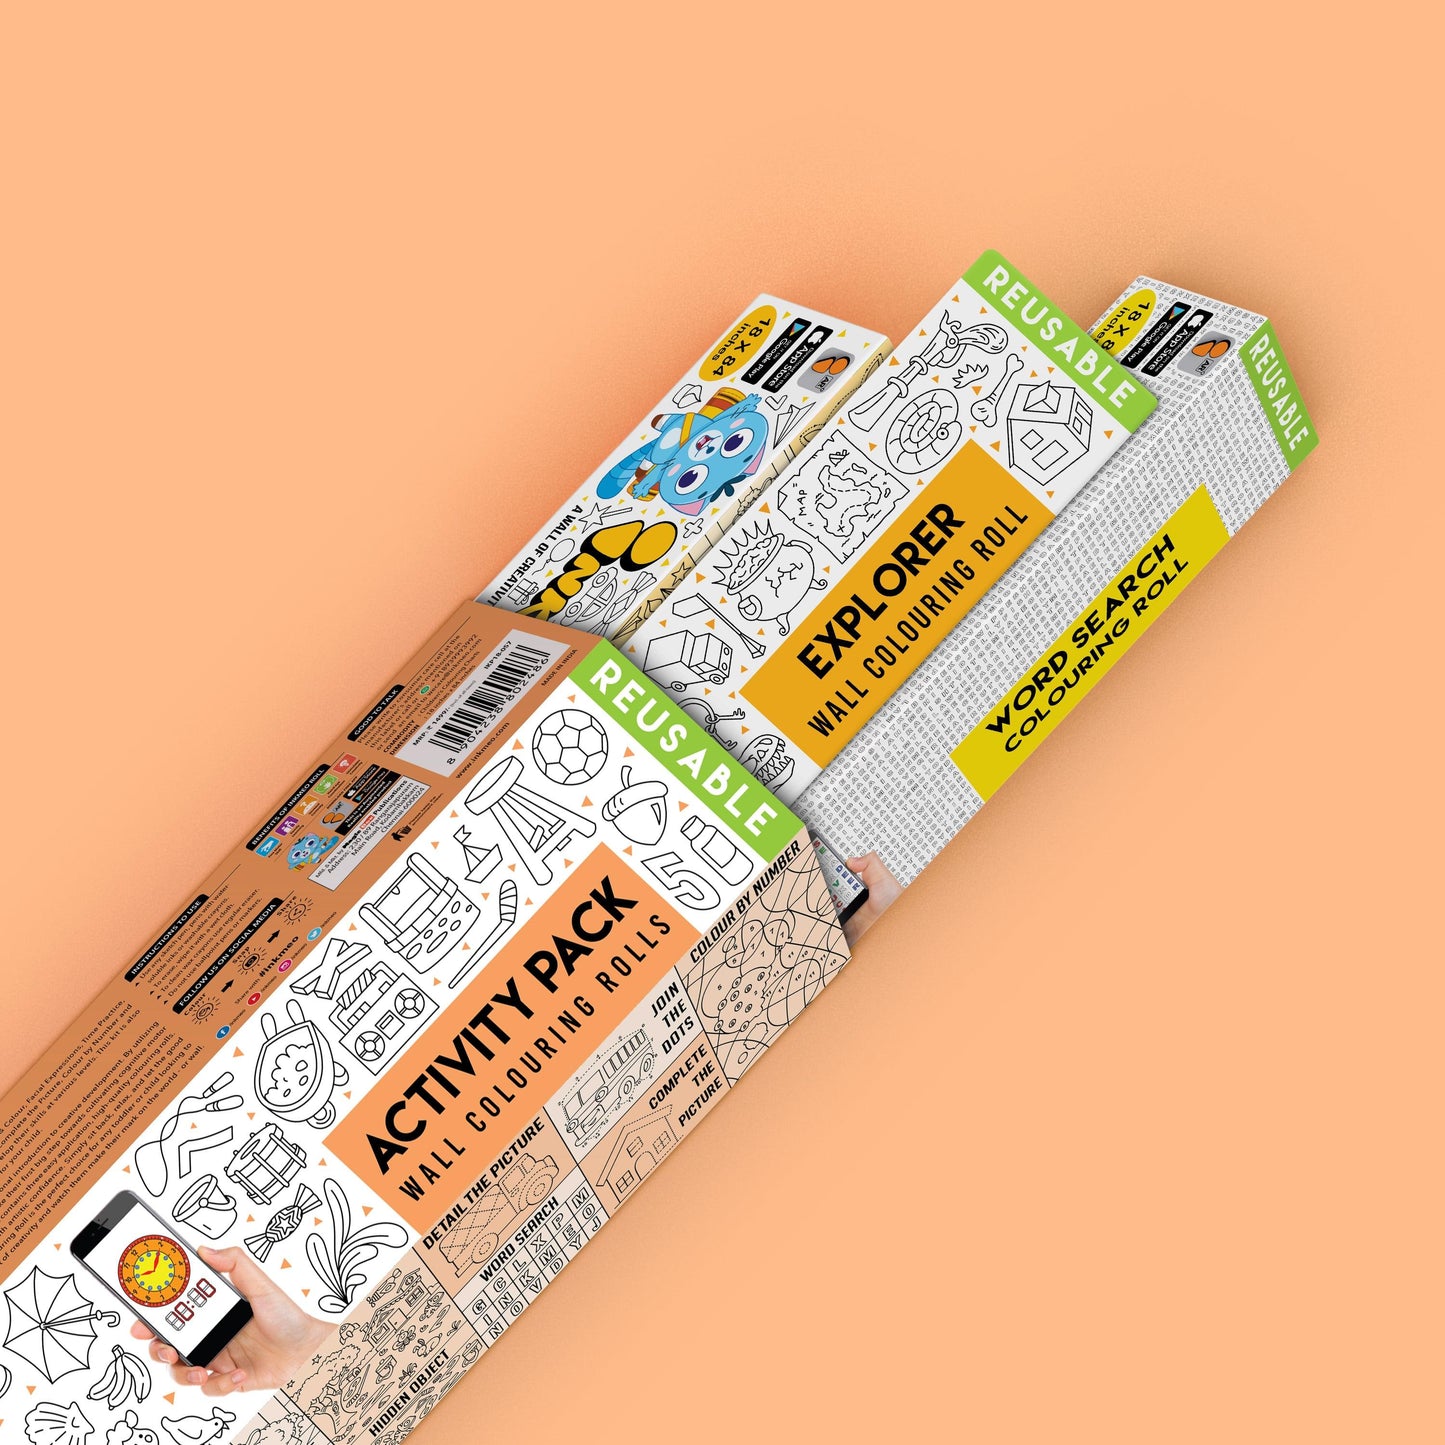 The image depicts an orange background with a large box positioned diagonally from the bottom left corner. Three smaller boxes are pulled out from the main box, each showcasing different themes.